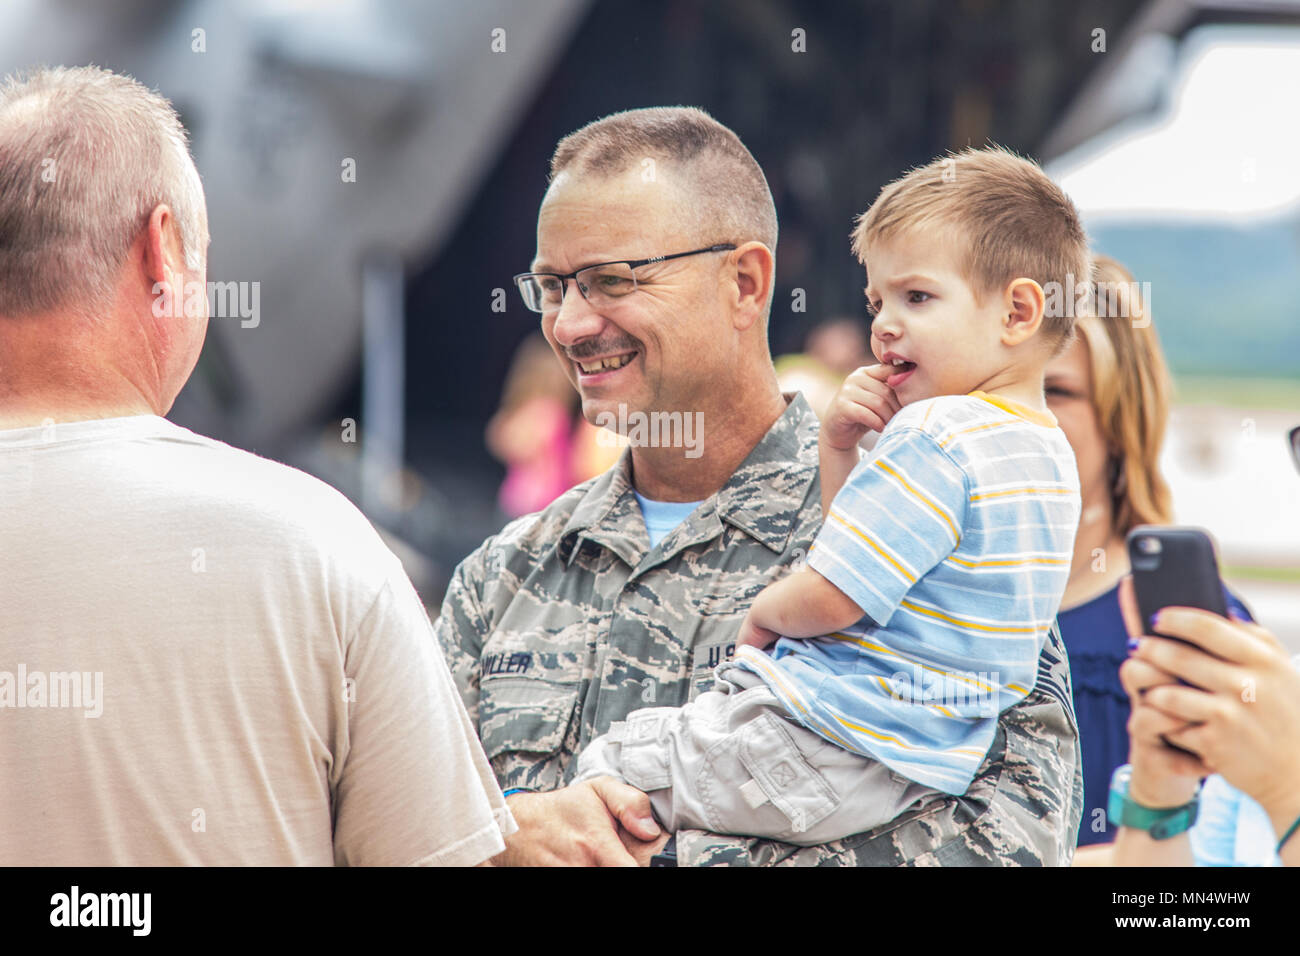 U.S. Air Force Chief Master Sgt. Randy Miller, command chief master sergeant of the 139th Airlift Wing, Missouri Air National Guard, holds his grandson, during a Family Fun Day, at Rosecrans Air National Guard Base, St. Joseph, Mo., July 6, 2017. The event was held for family members of Airmen assigned to the 139th Airlift Wing, Missouri Air National Guard. The Family Fun Day was hosted by the 139th Airmen and Family Readiness program, which included carnival rides, a petting zoo, dunk tank and more. (U.S. Air National Guard photo by Staff Sgt. Patrick Evenson) Stock Photo